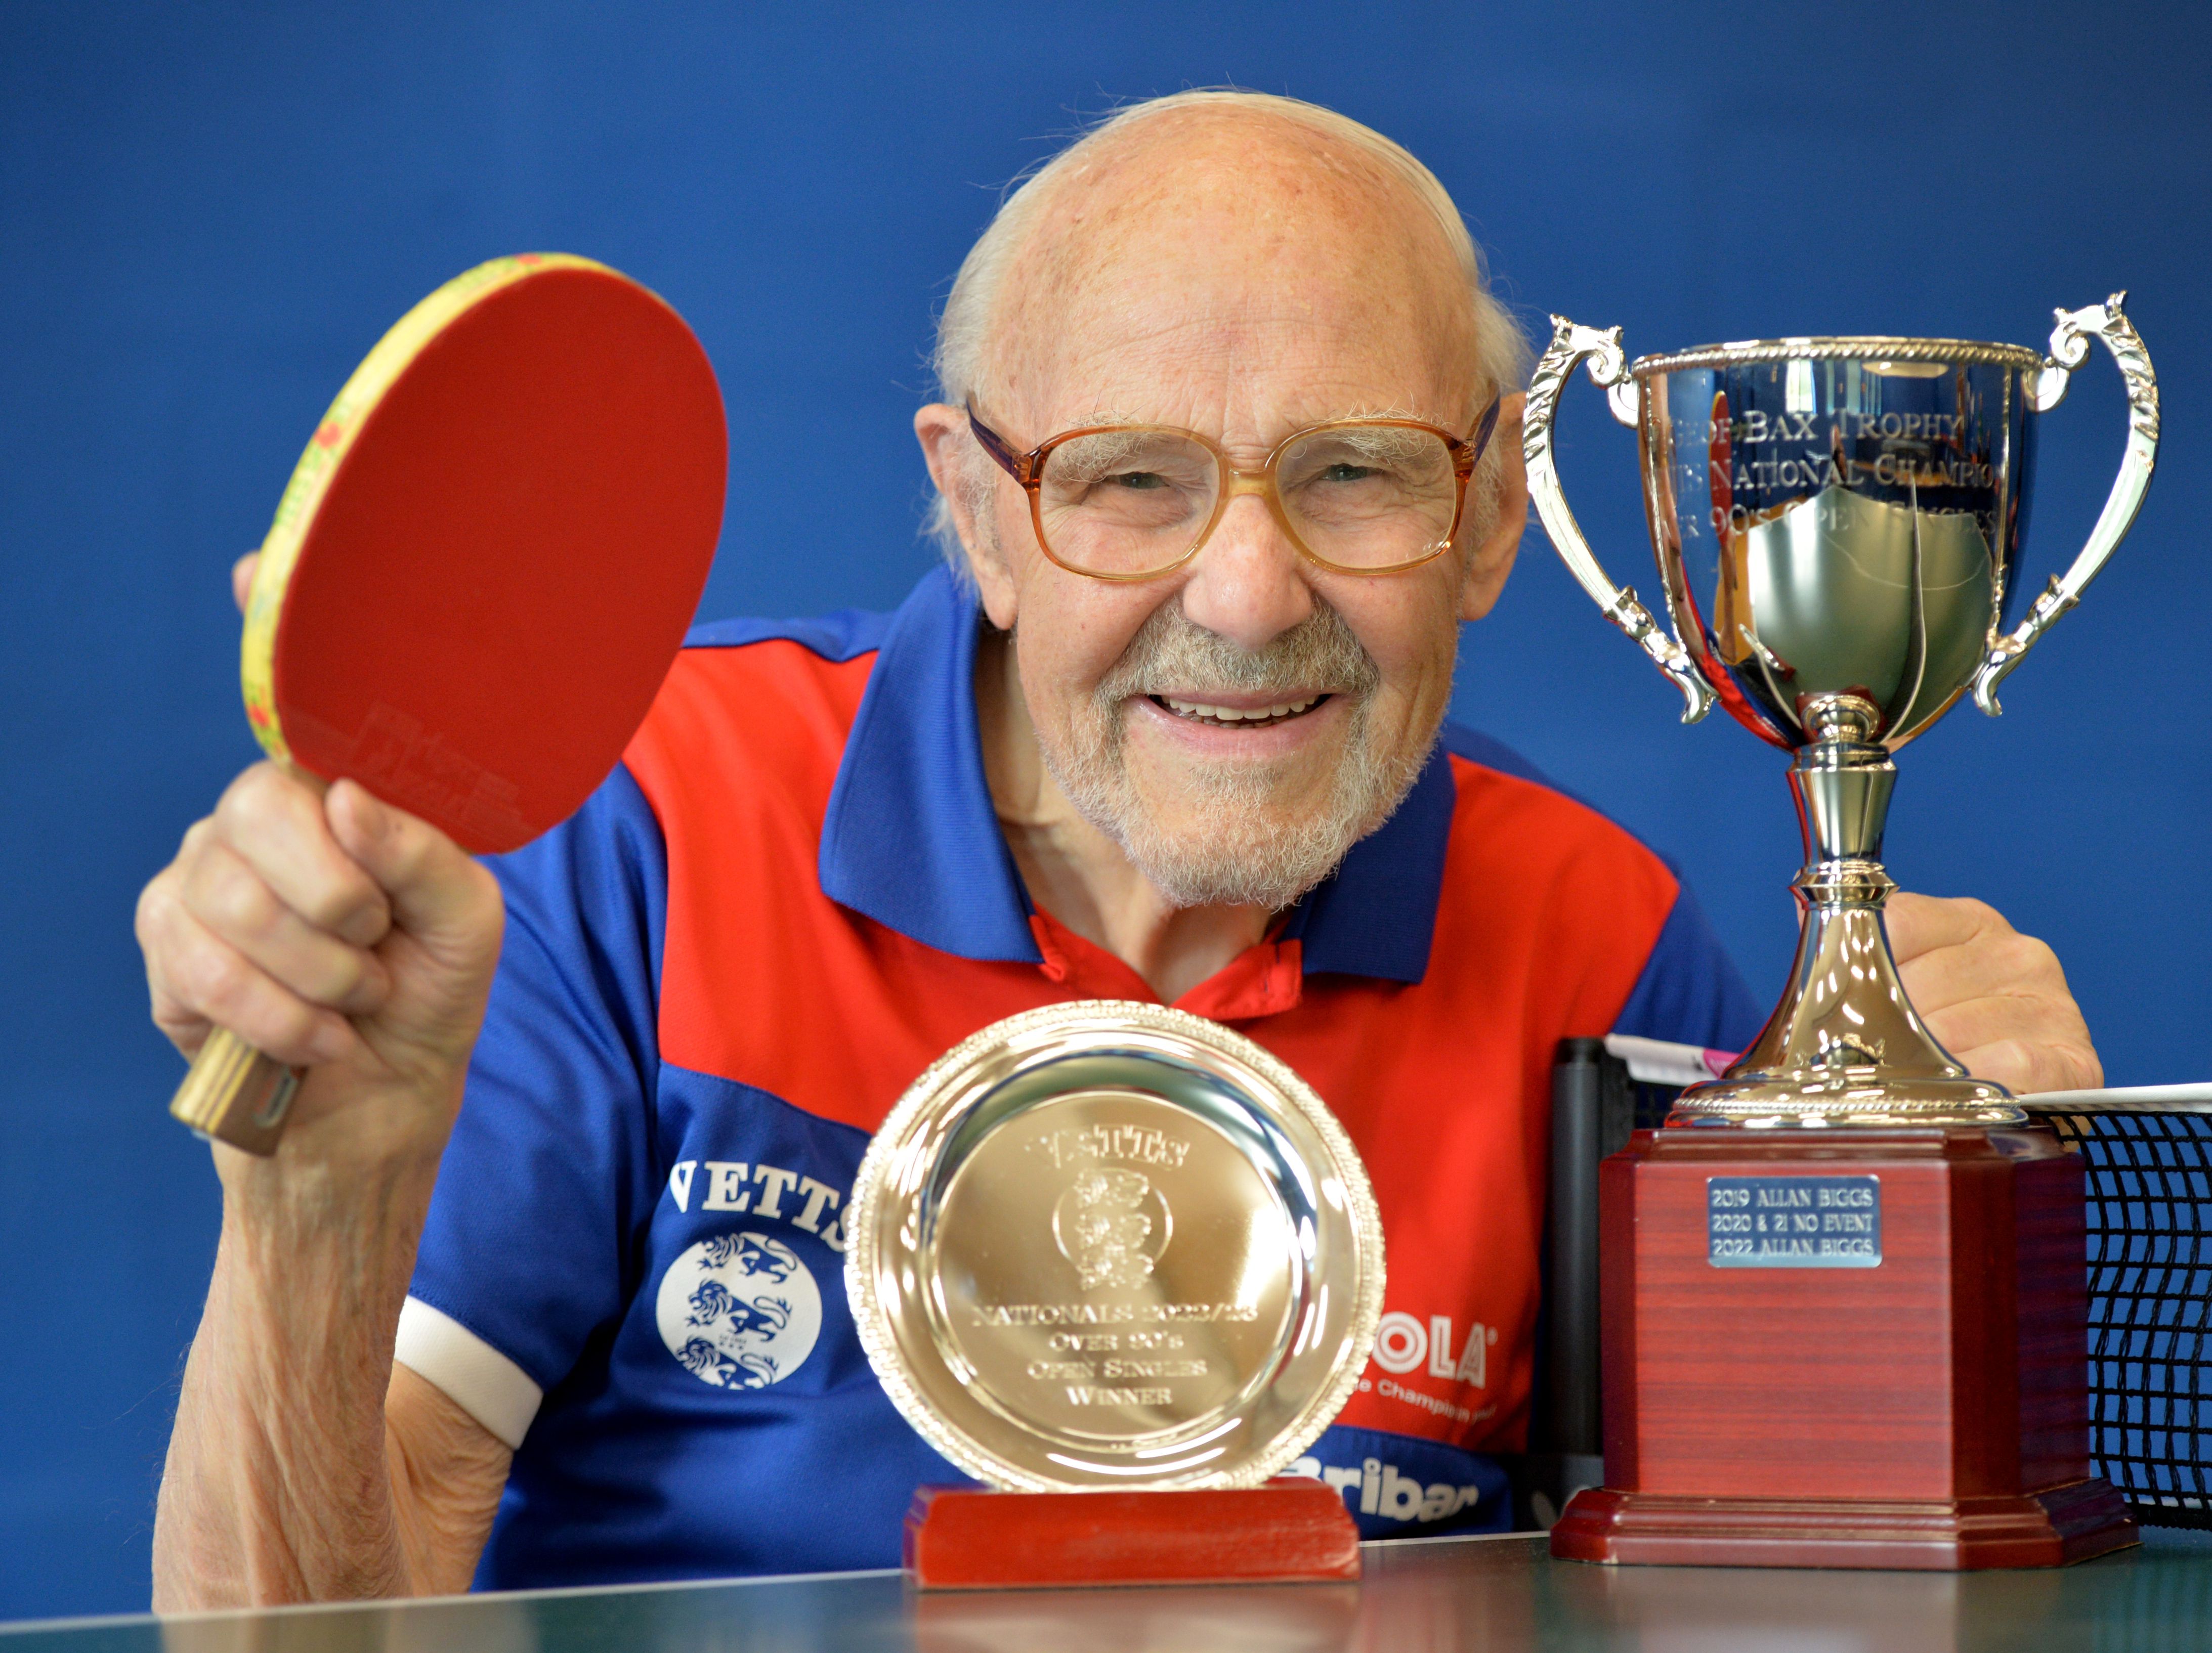 Wombourne's Eric Renshaw reaches his sporting peak at 92 with national table tennis title